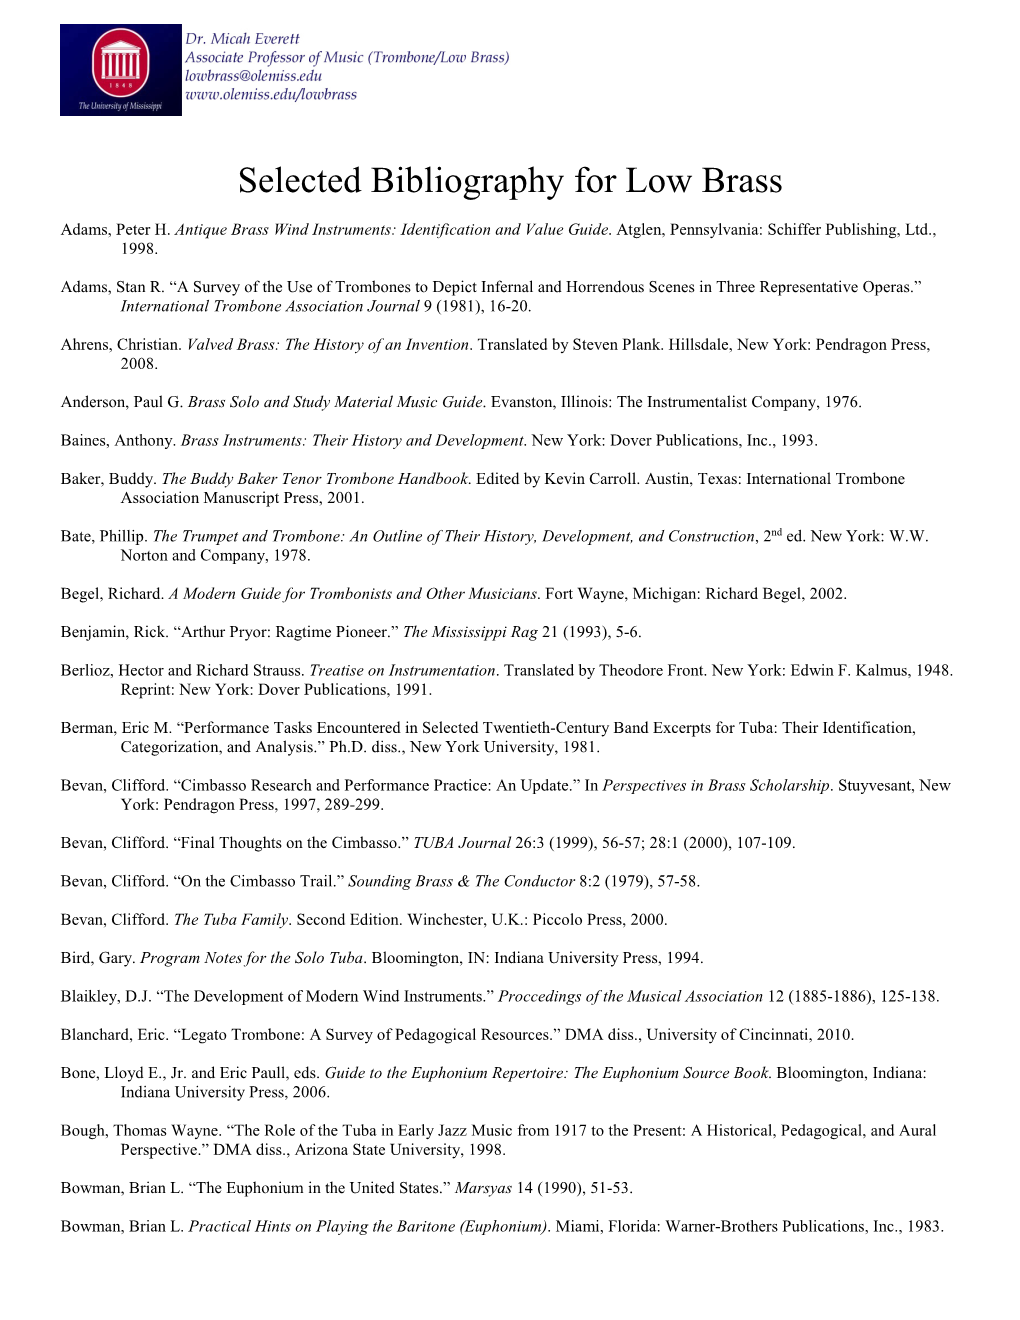 Selected Bibliography for Low Brass